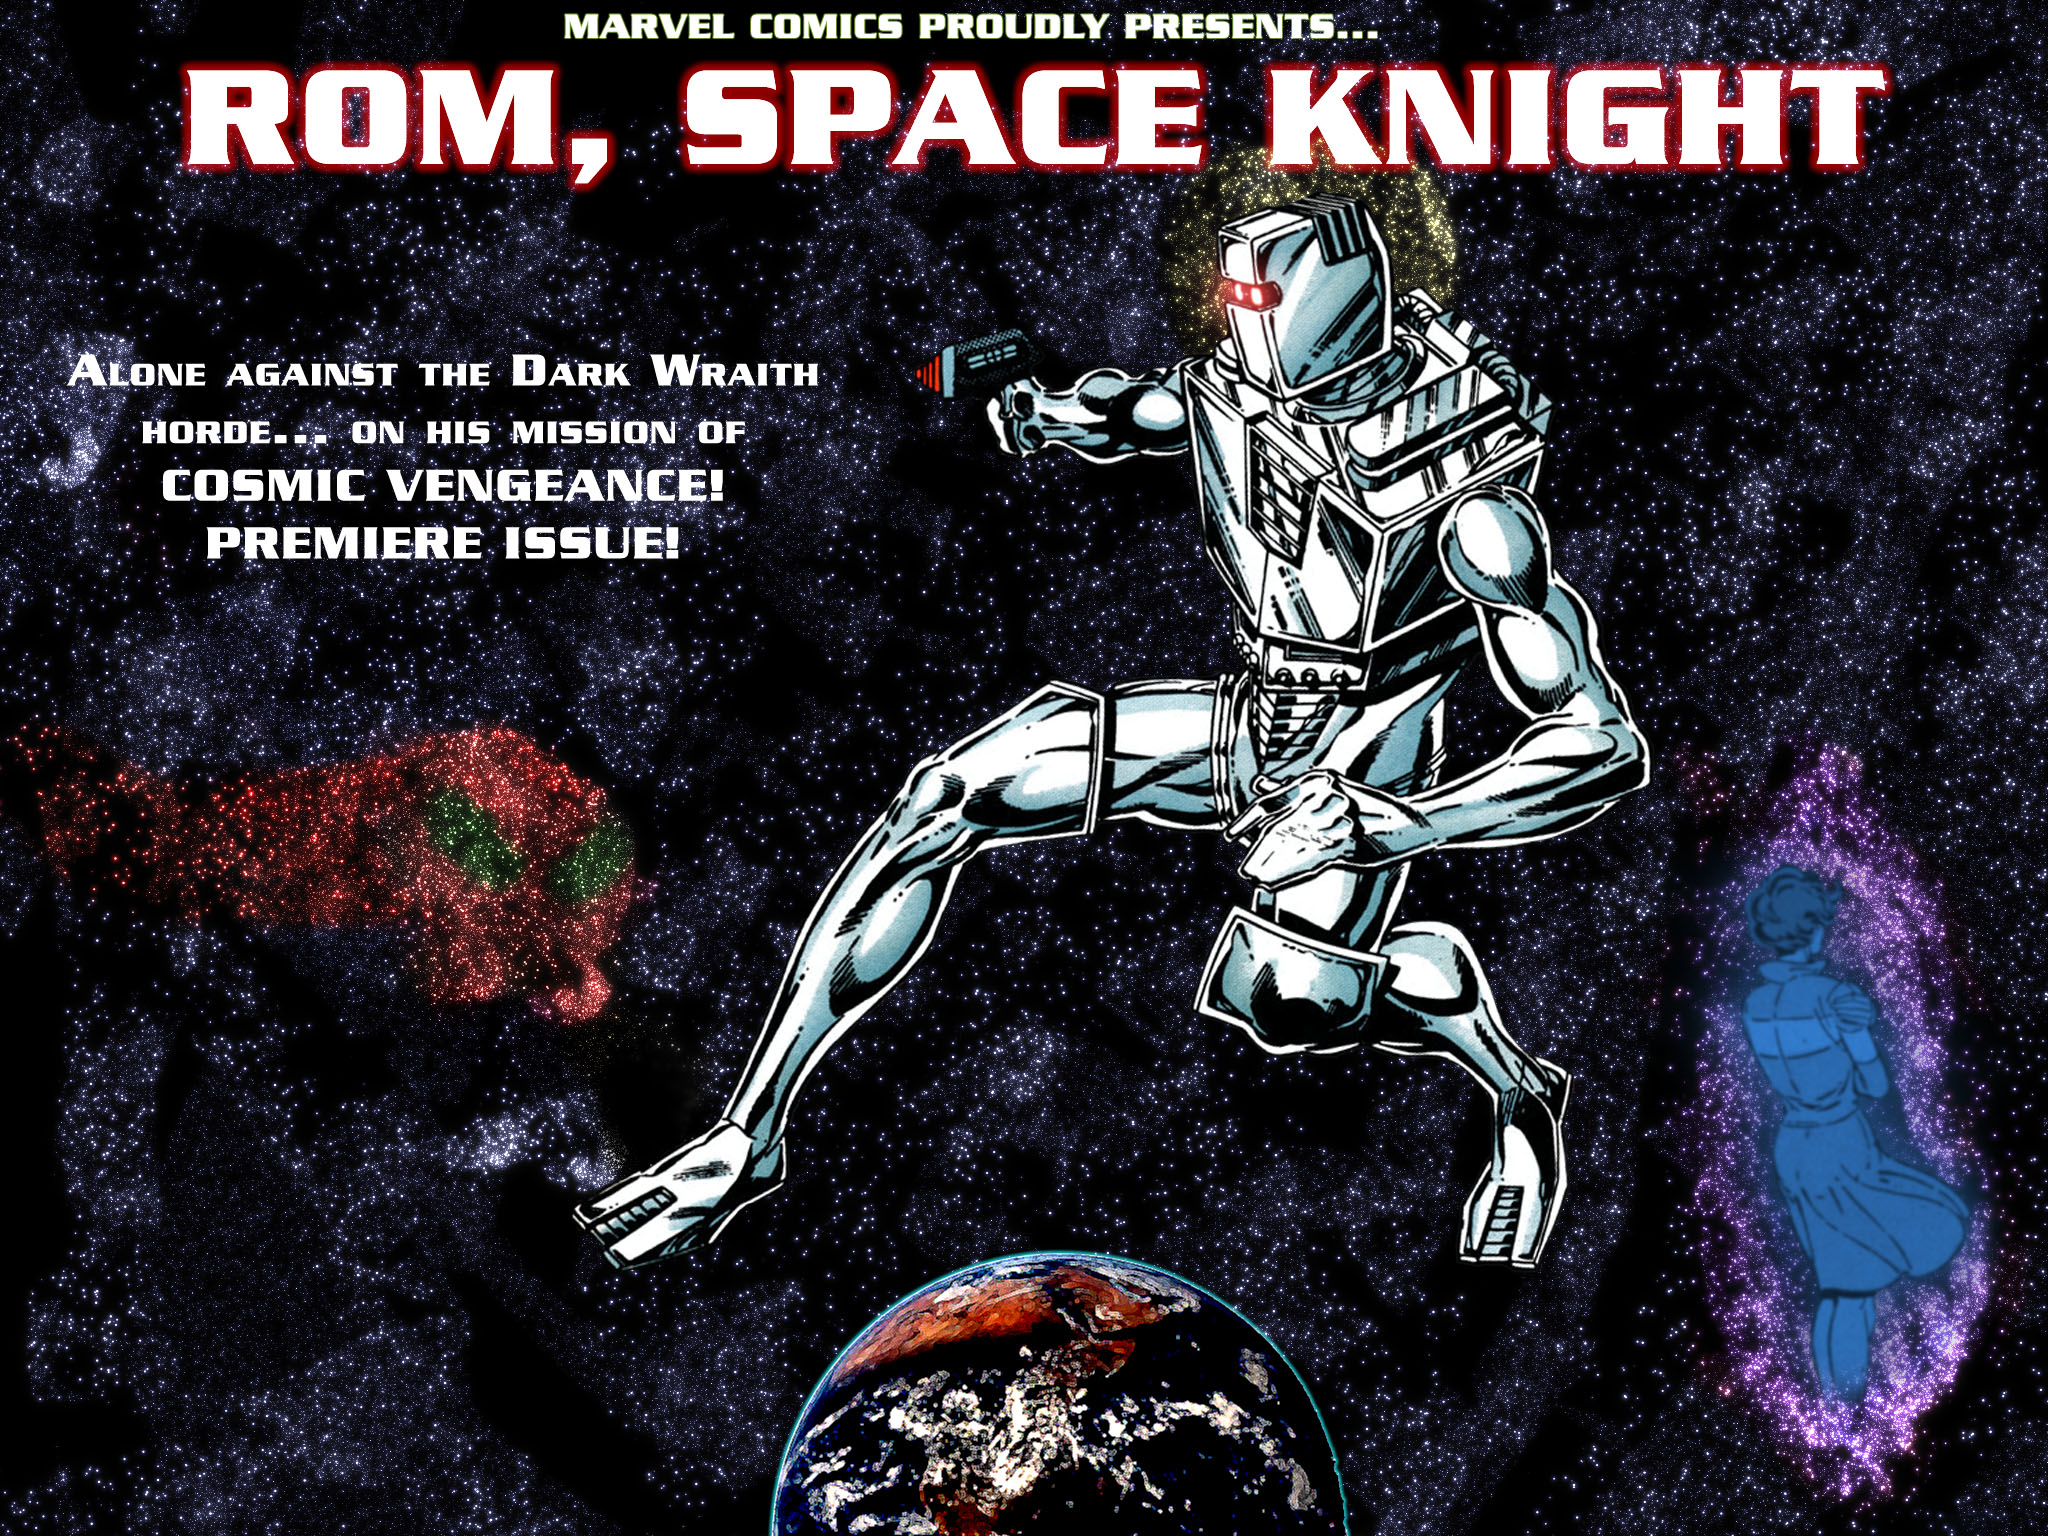 Amazing Rom: Space Knight Pictures & Backgrounds